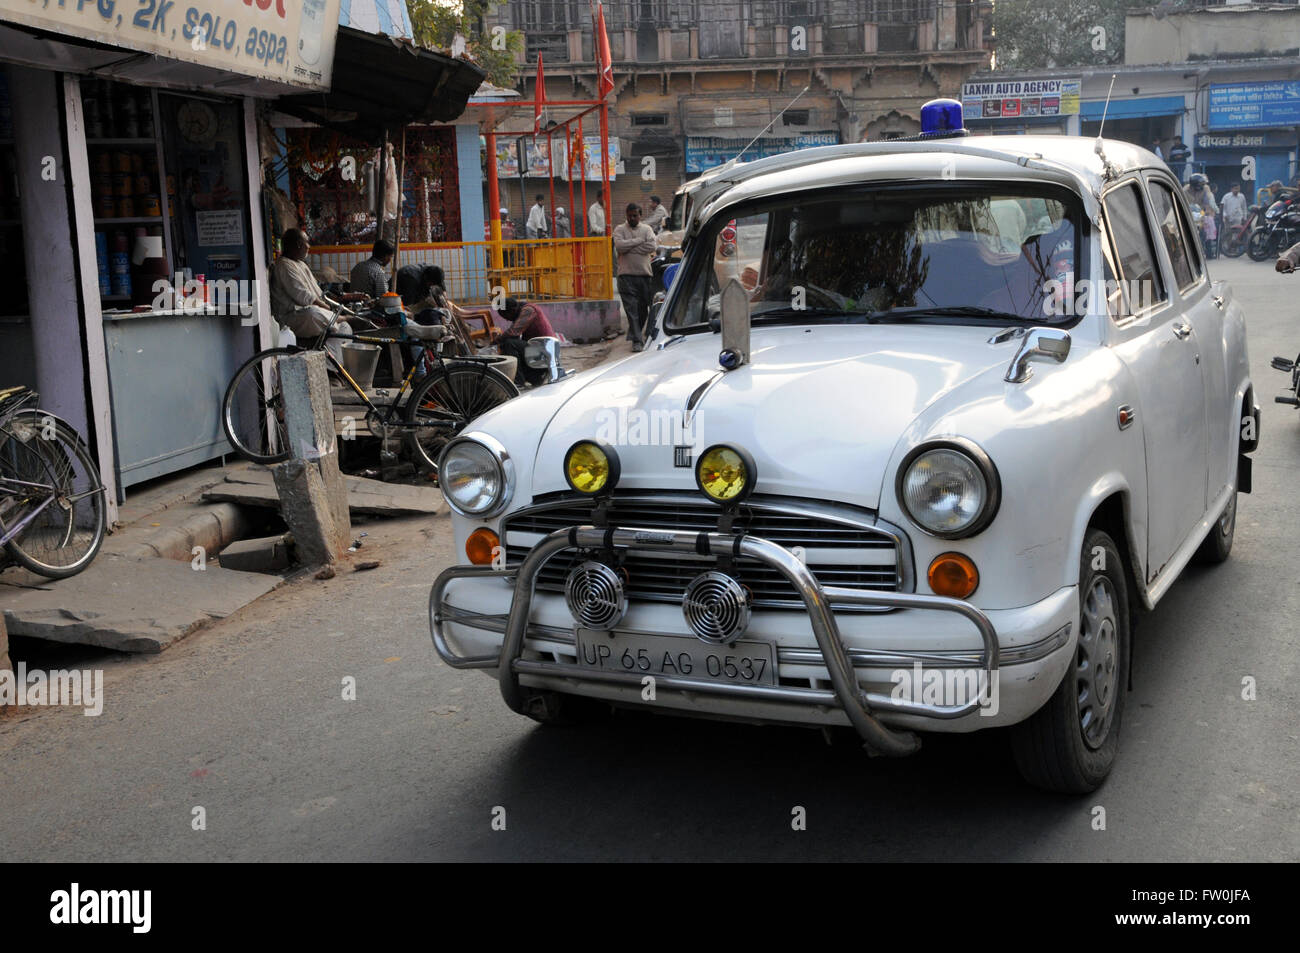 A Hindustan Ambassador, cherished by its present owner, parked in the street at Varanasi, Northern India. Stock Photo